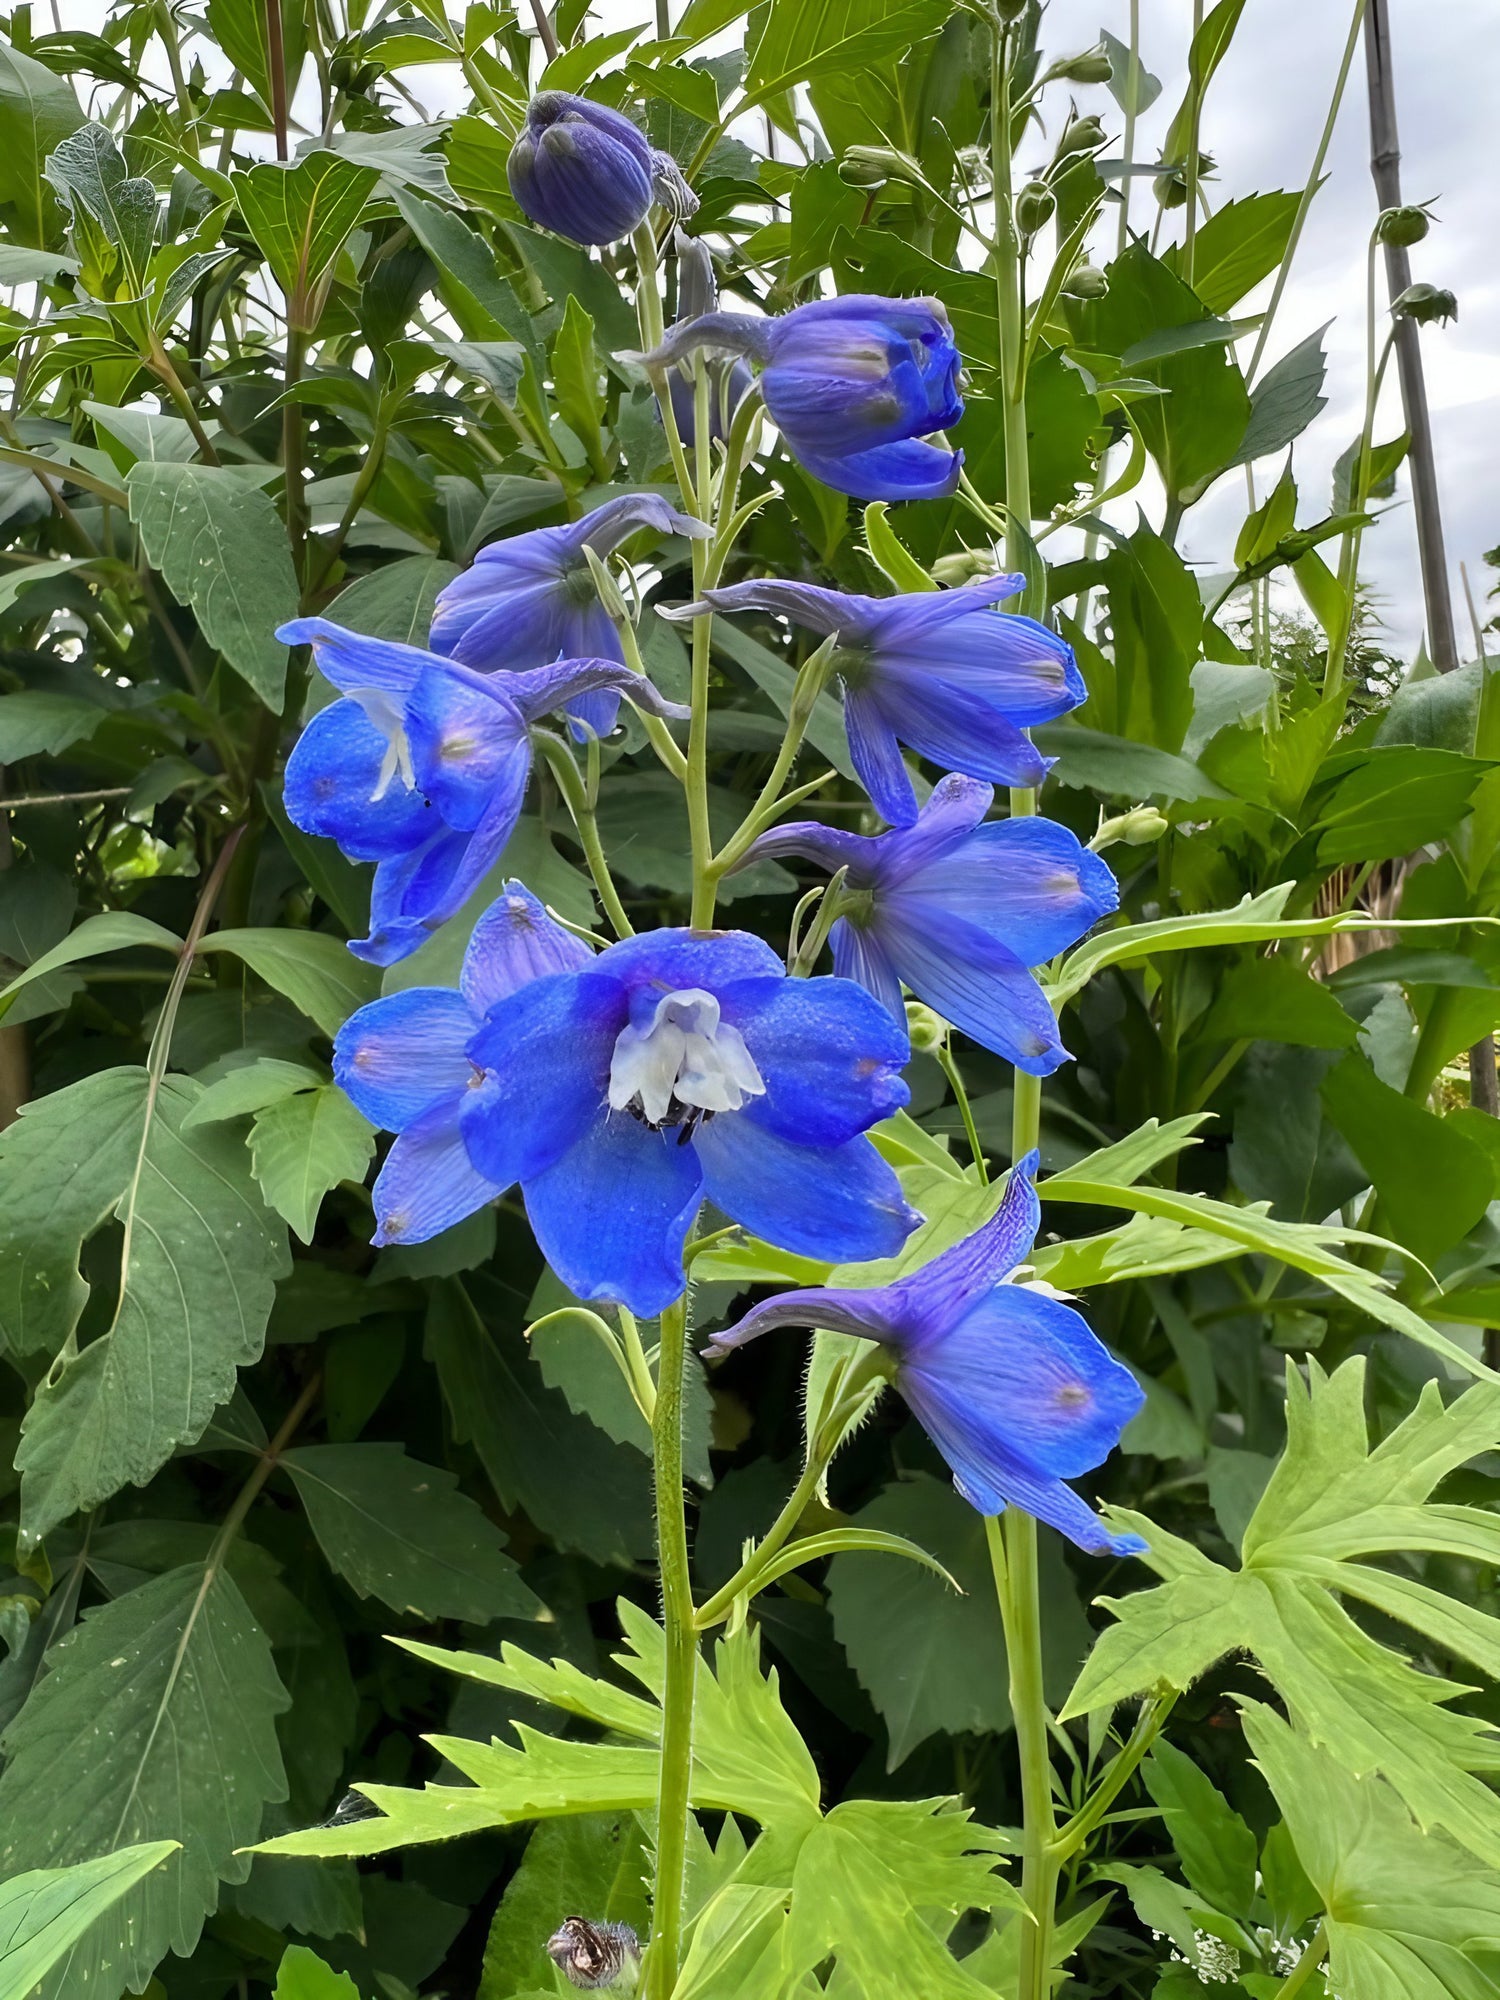 Close-up of Delphinium Pacific Giant Summer Skies with blue blossoms and green foliage